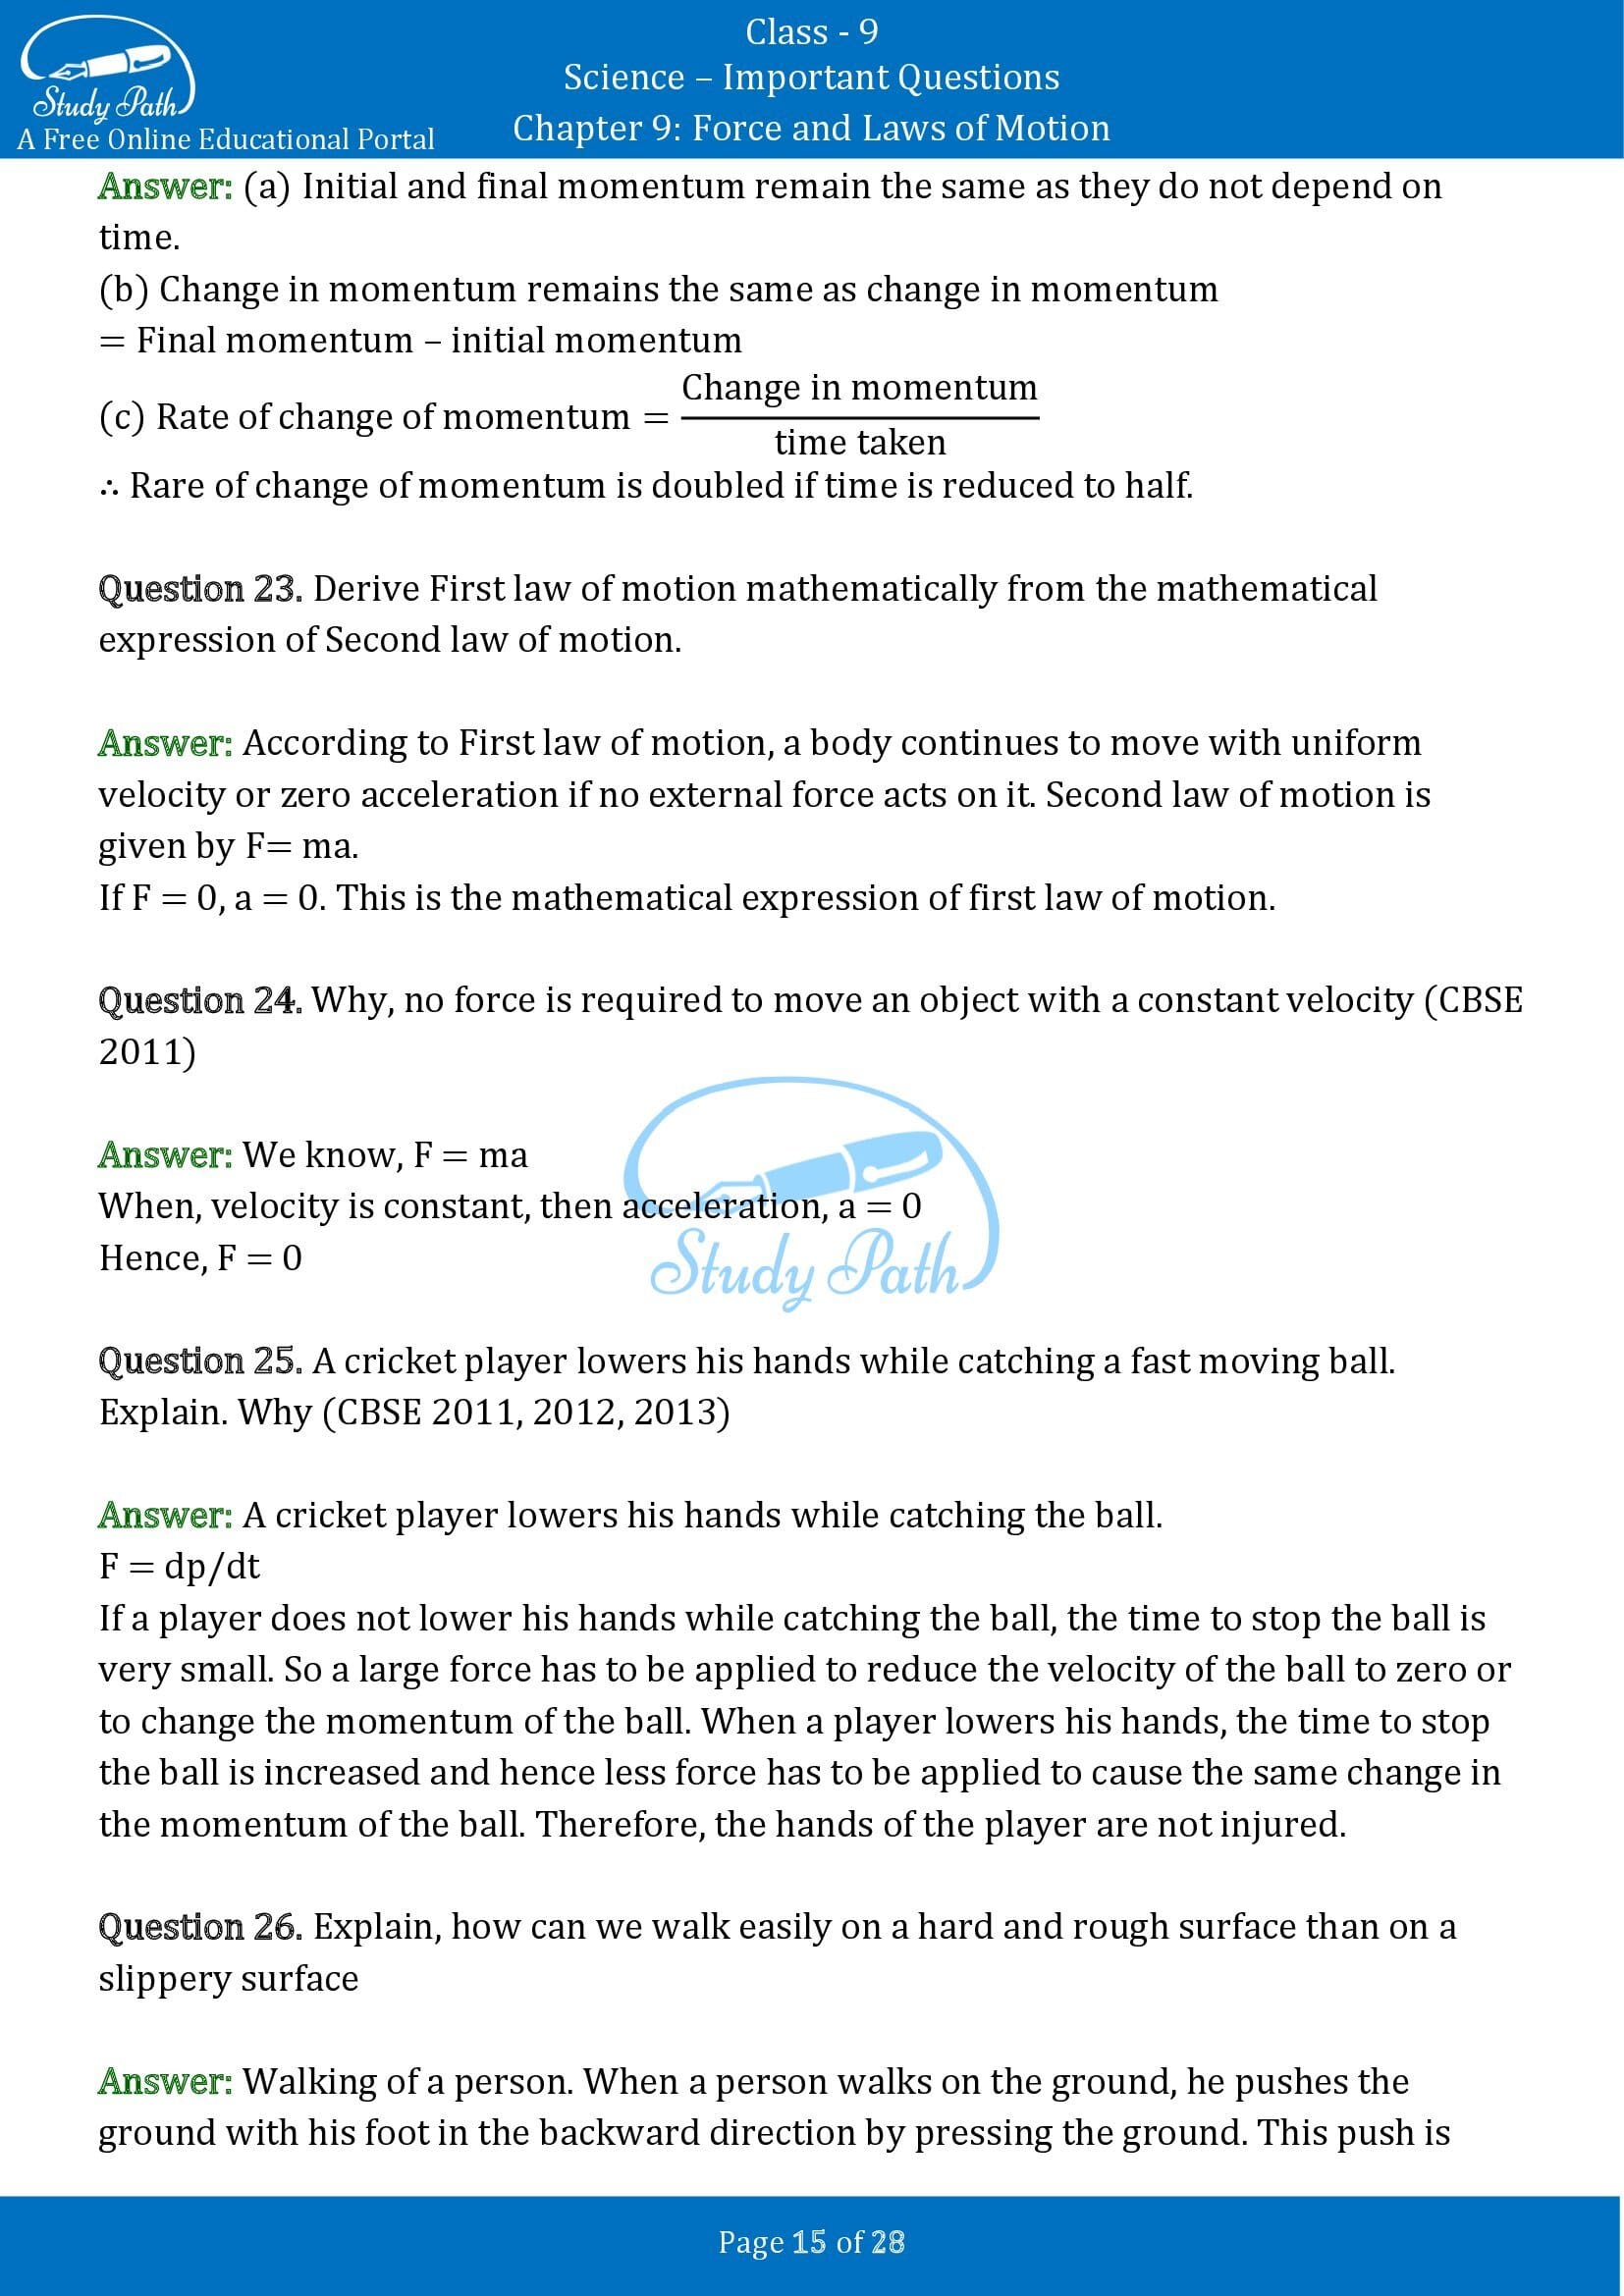 Important Questions for Class 9 Science Chapter 9 Force and Laws of Motion 00015